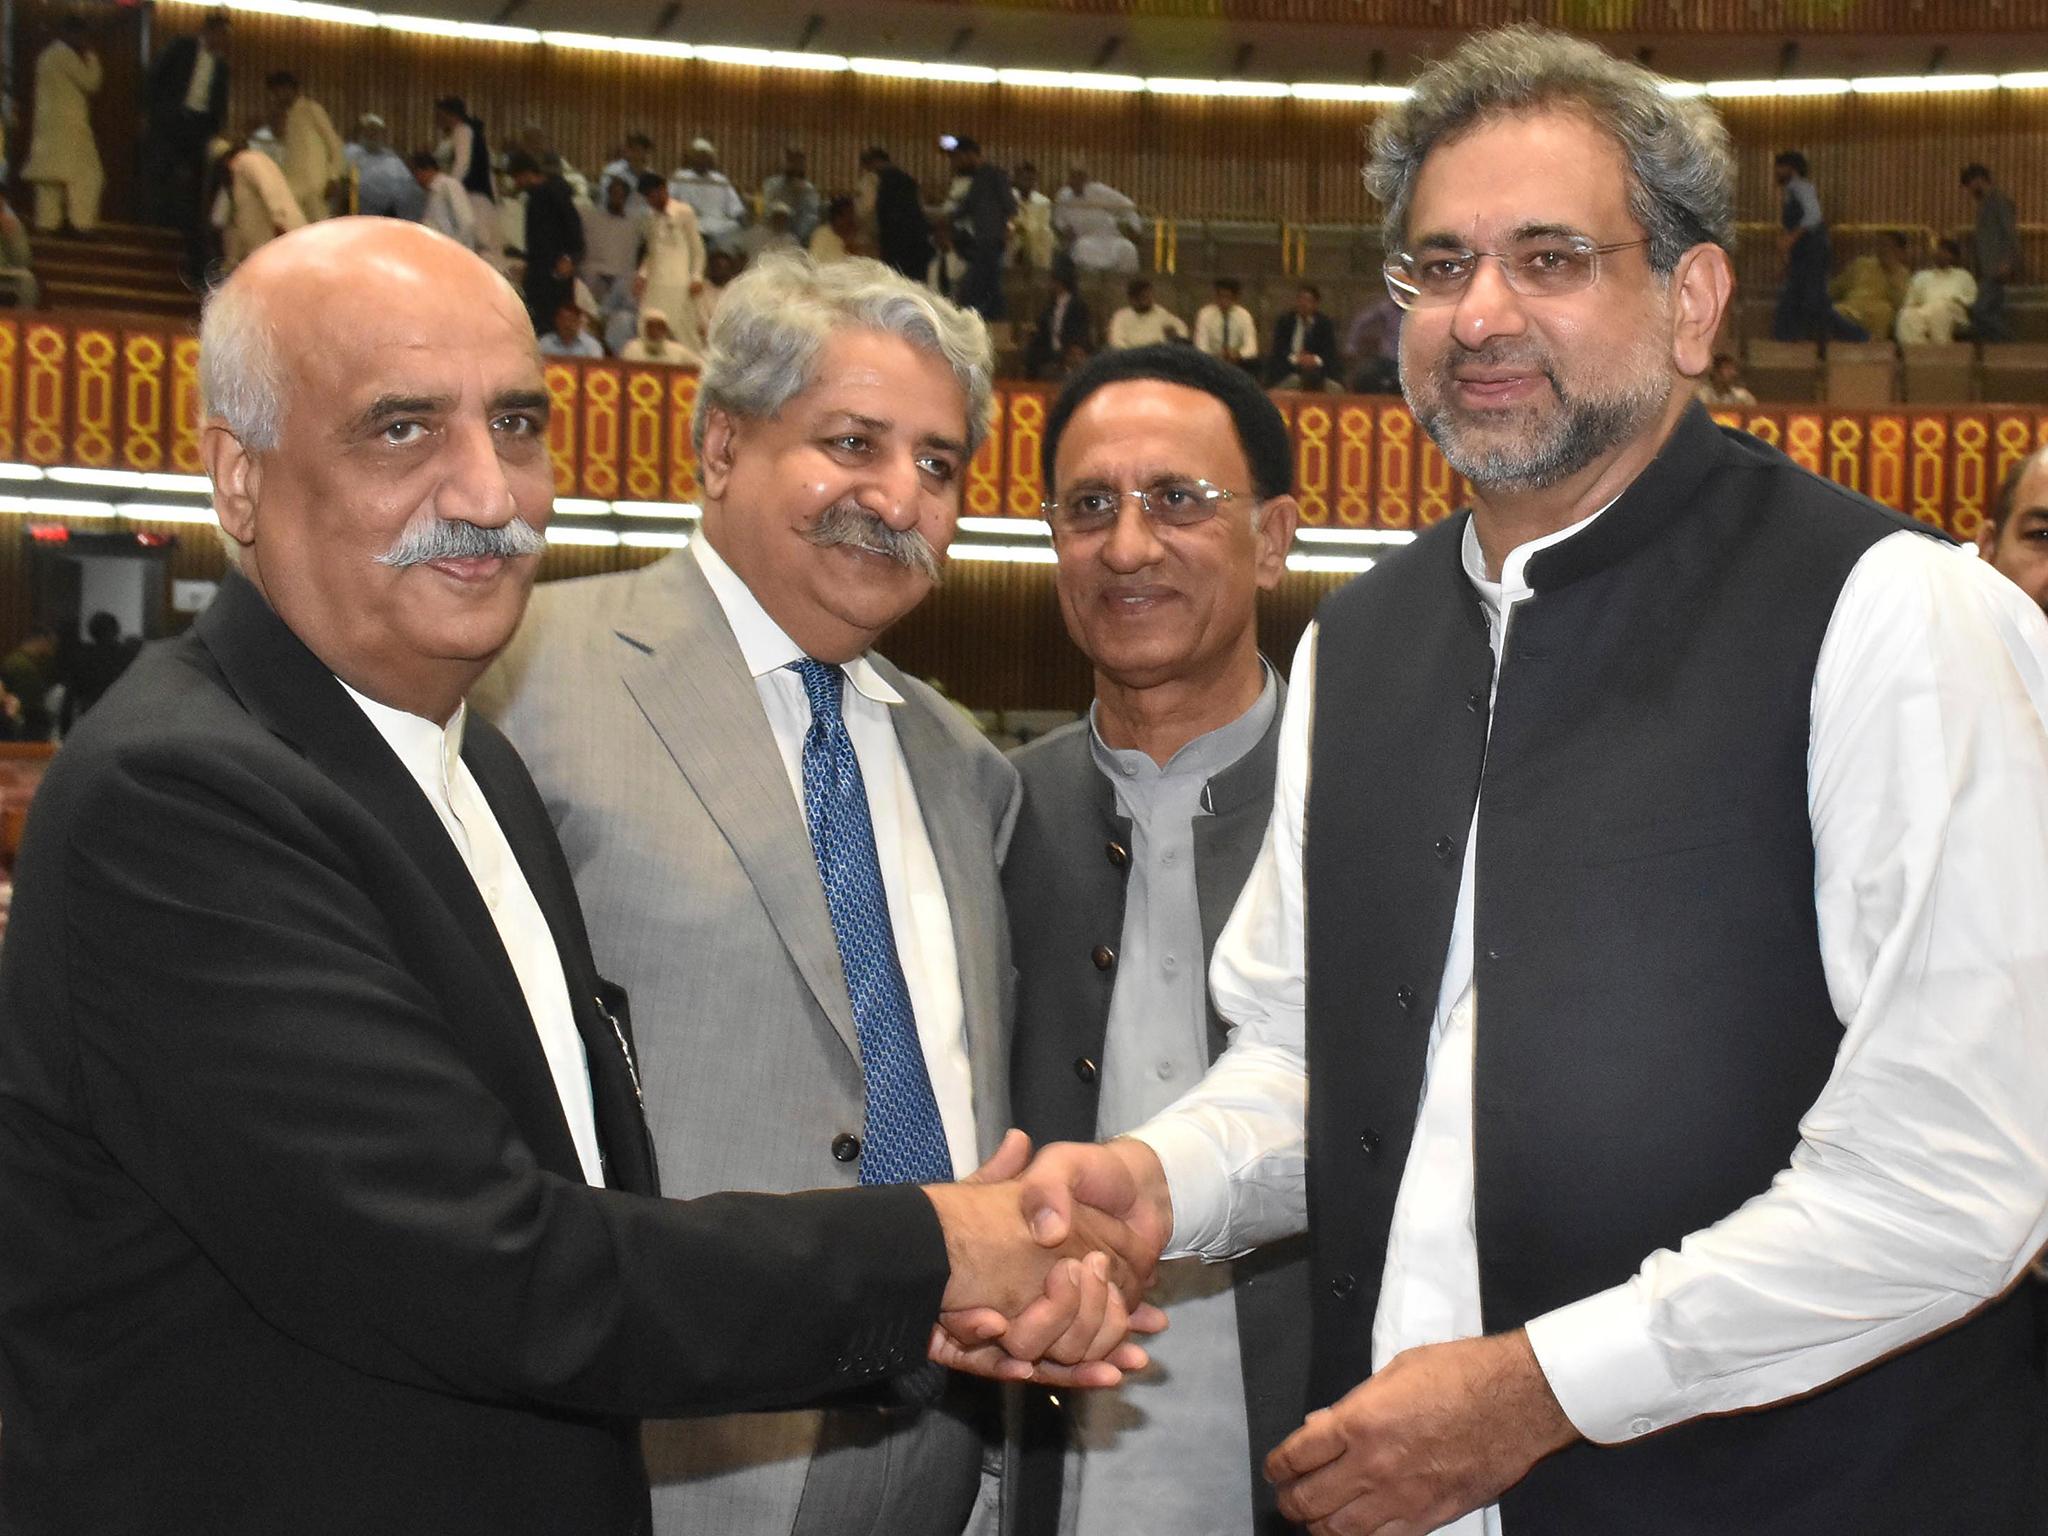 Newly-elected prime minister of Pakistan Shahid Khaqan Abbasi, right, is greeted by the Opposition leader Khursheed Shah, left